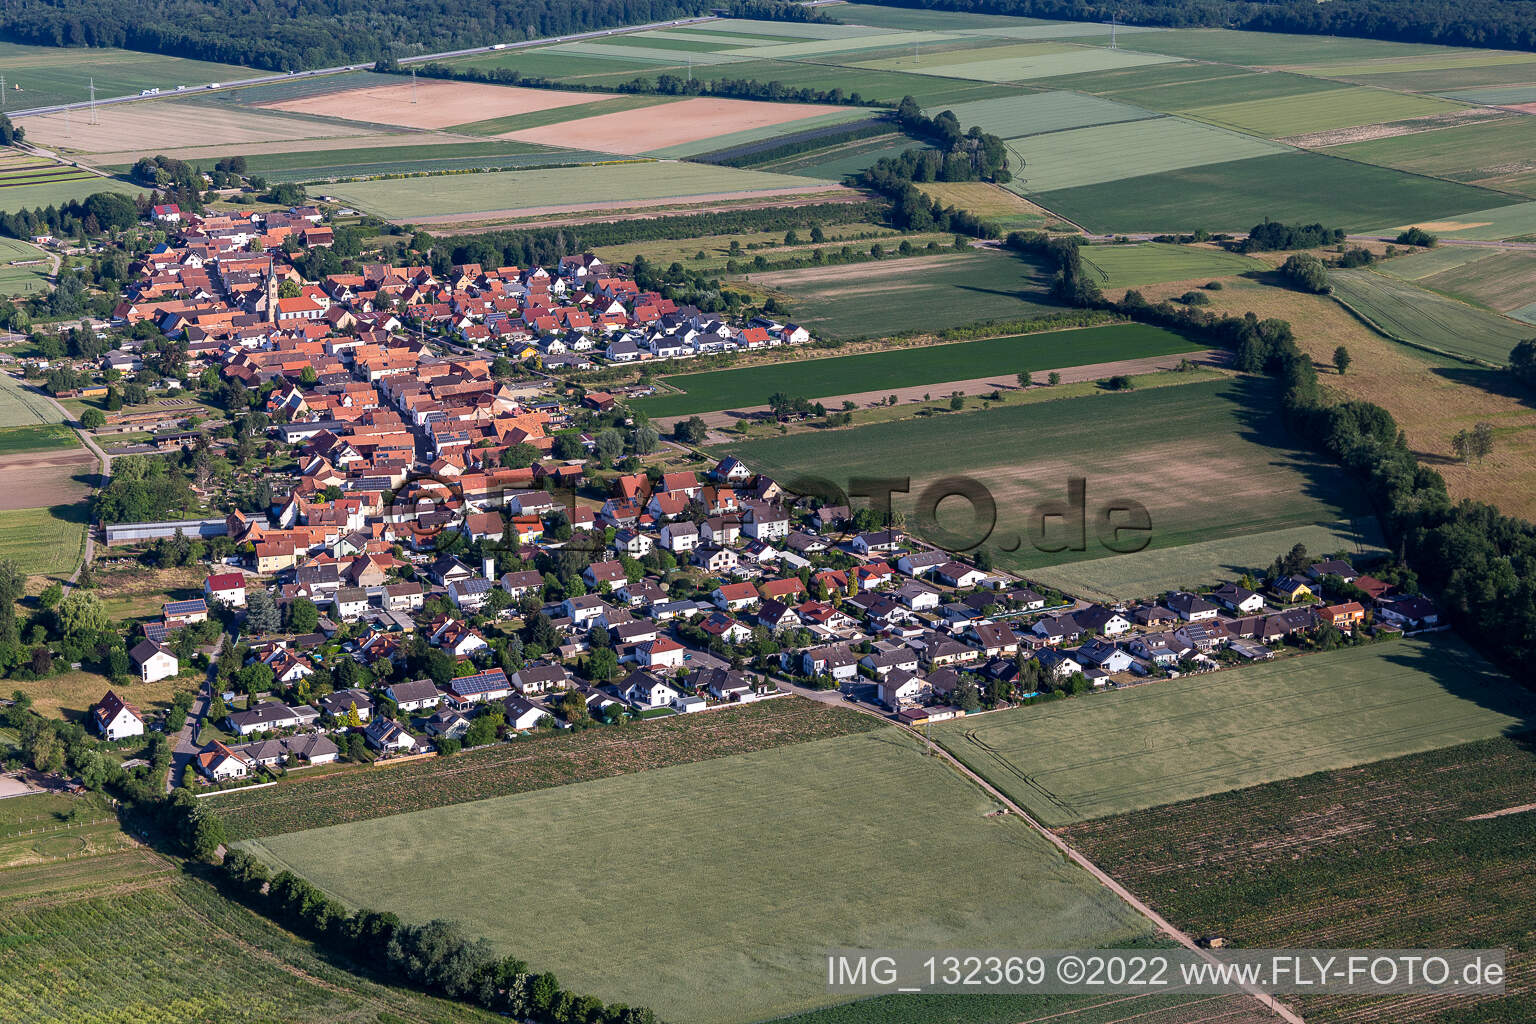 Erlenbach bei Kandel in the state Rhineland-Palatinate, Germany seen from above